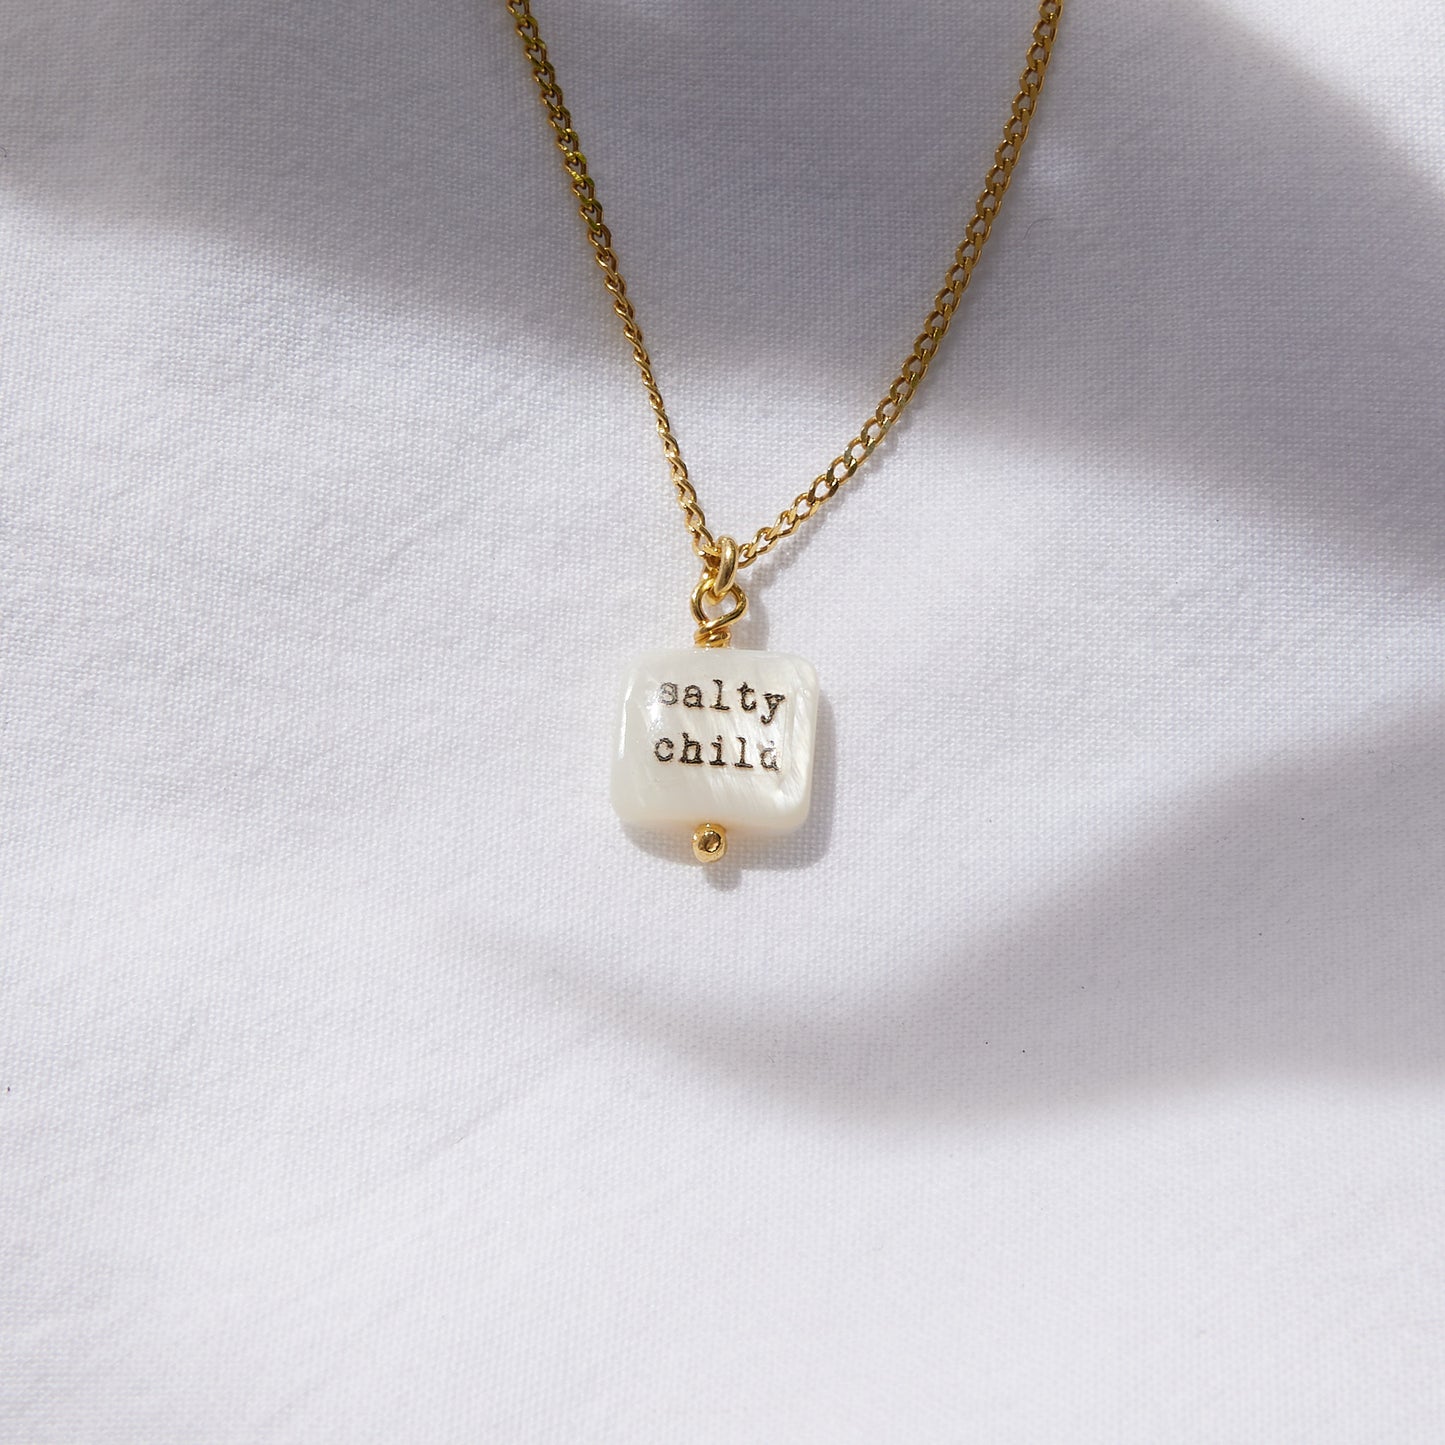 Salty Child Necklace 24k Gold Plated sterling silver